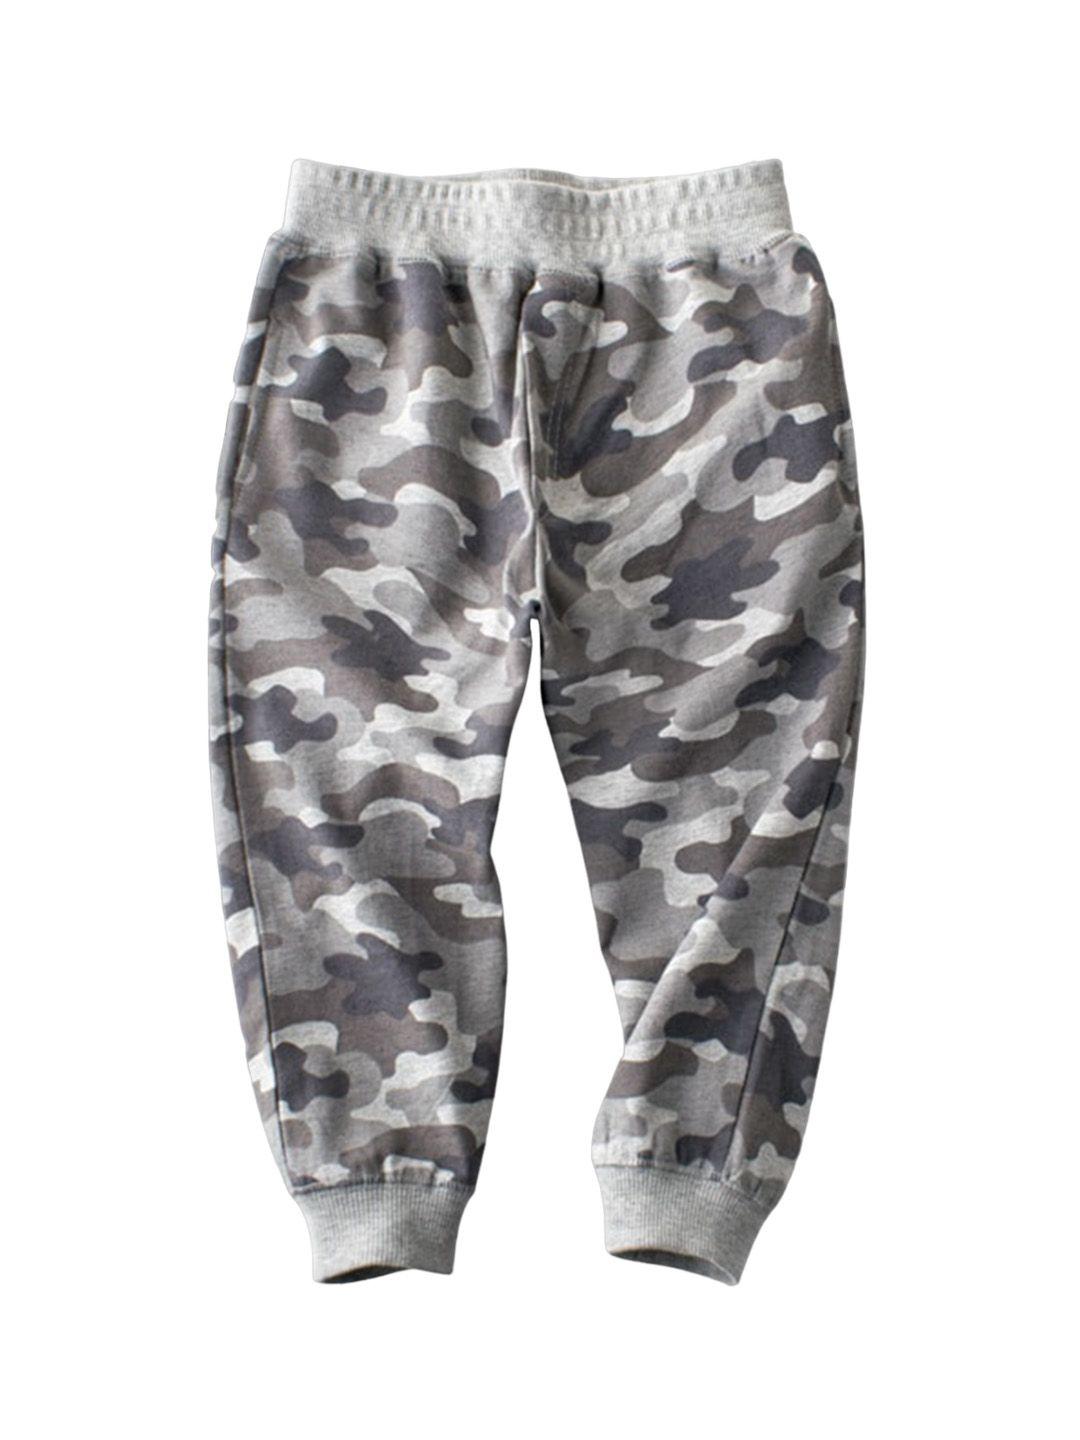 stylecast-boys-grey-camouflage-printed-slim-fit-easy-wash-joggers